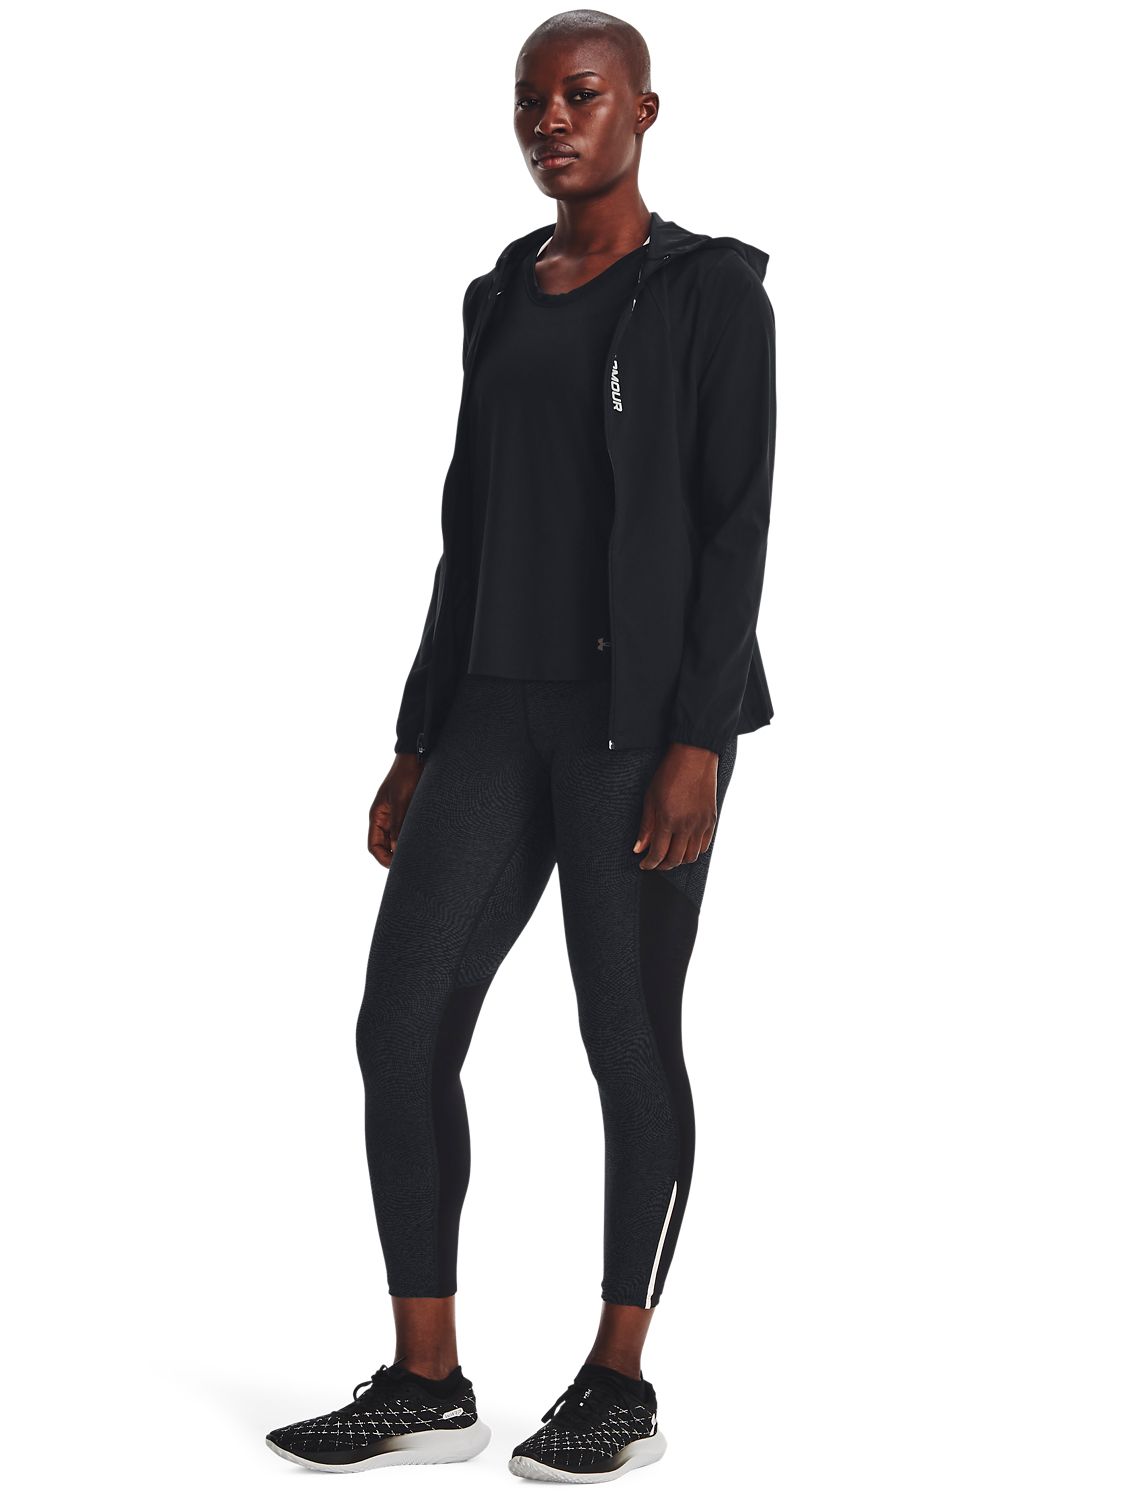 Women's Under Armour OutRun The Storm Jacket